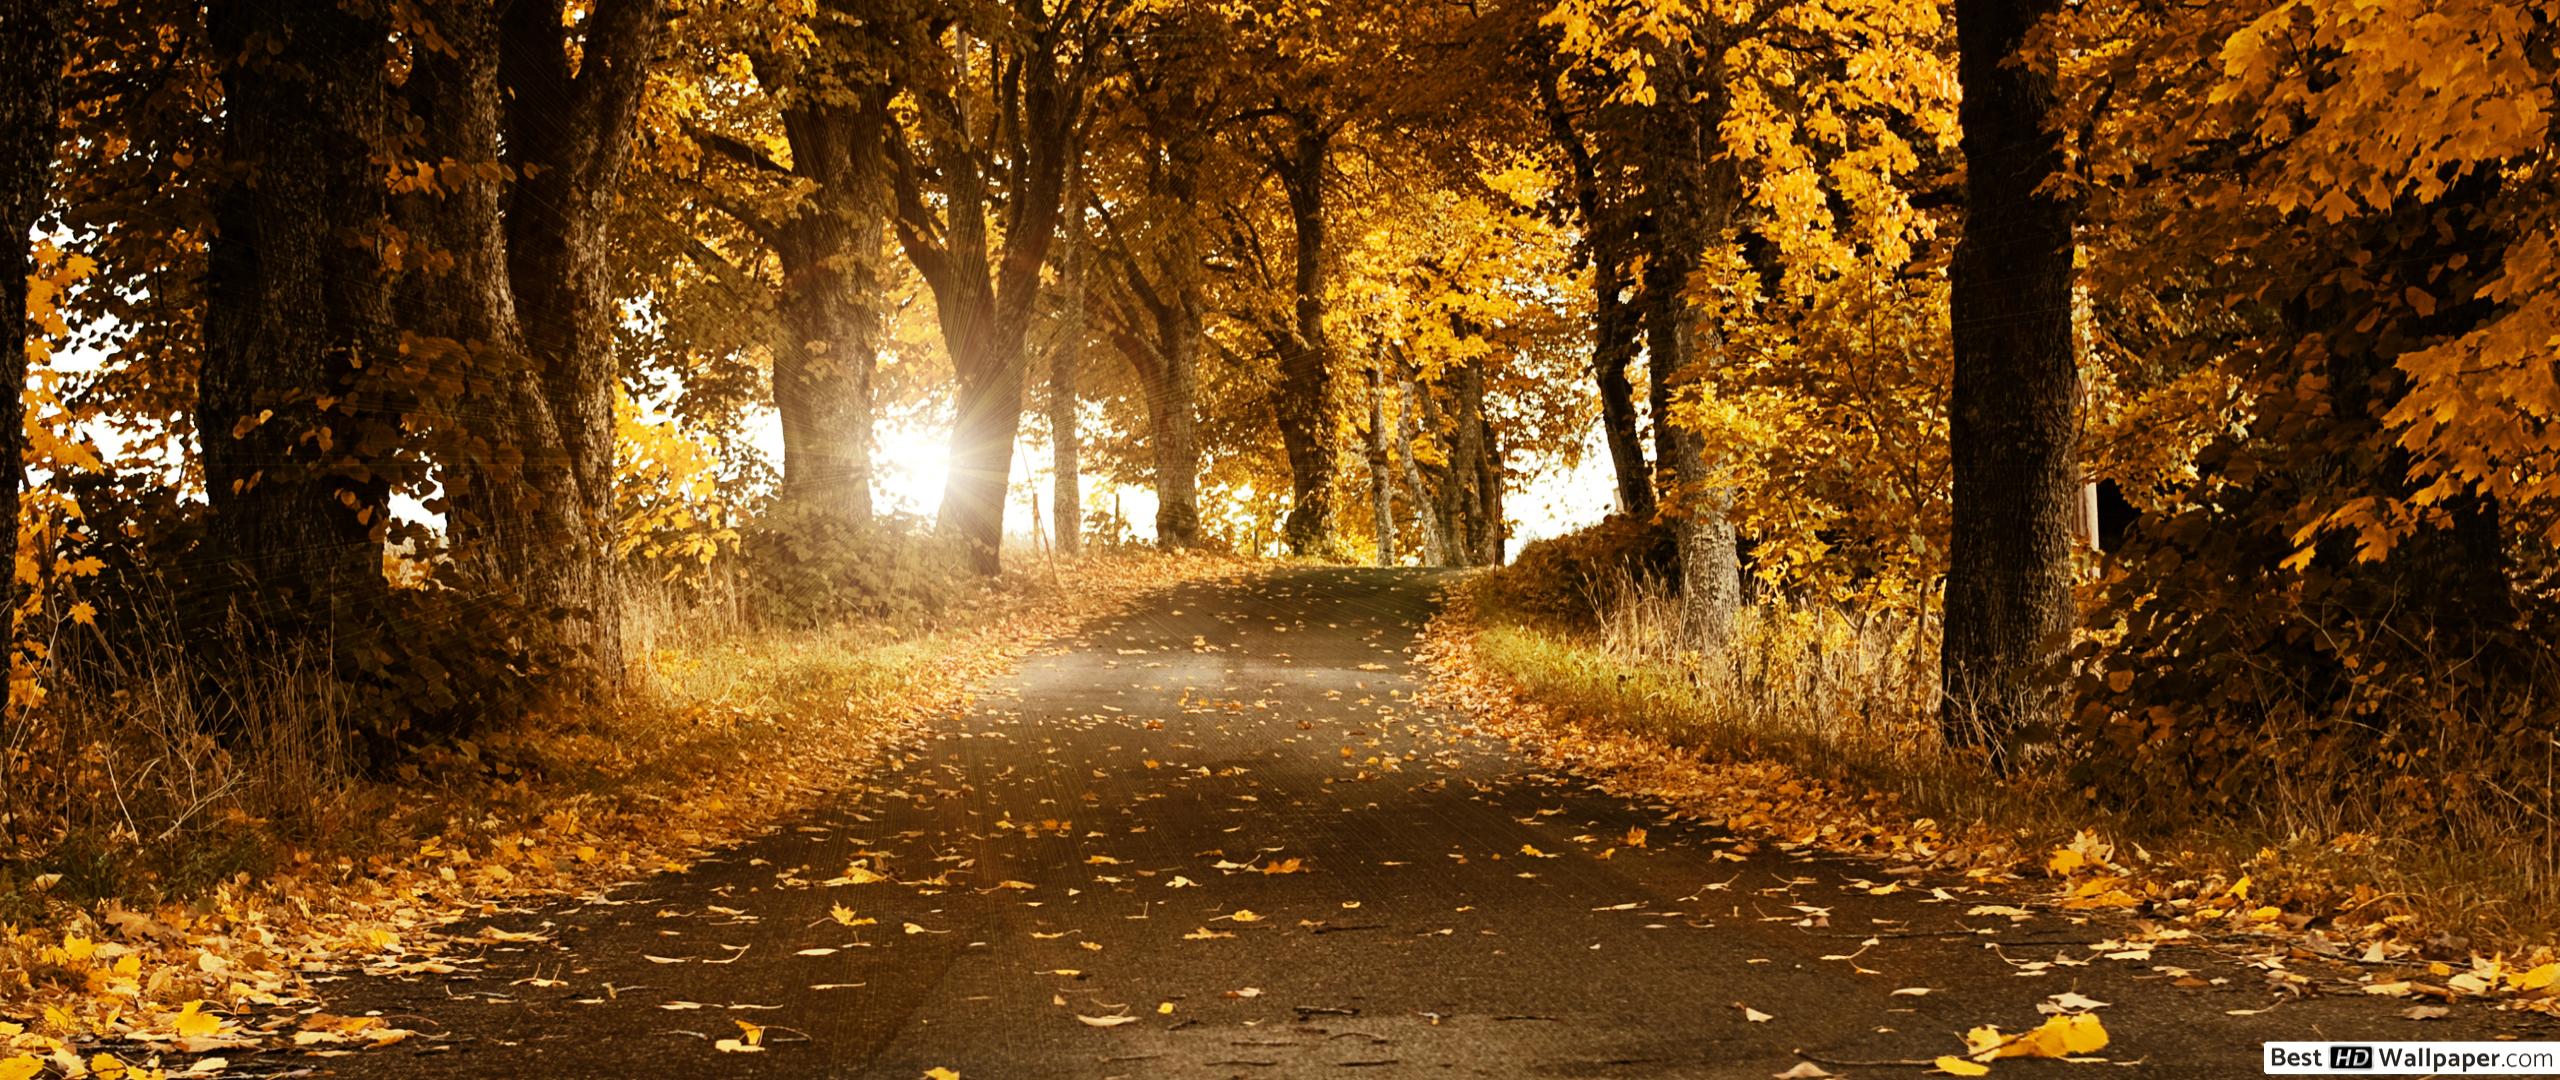 Autumn forest and yellow leaves HD wallpaper download